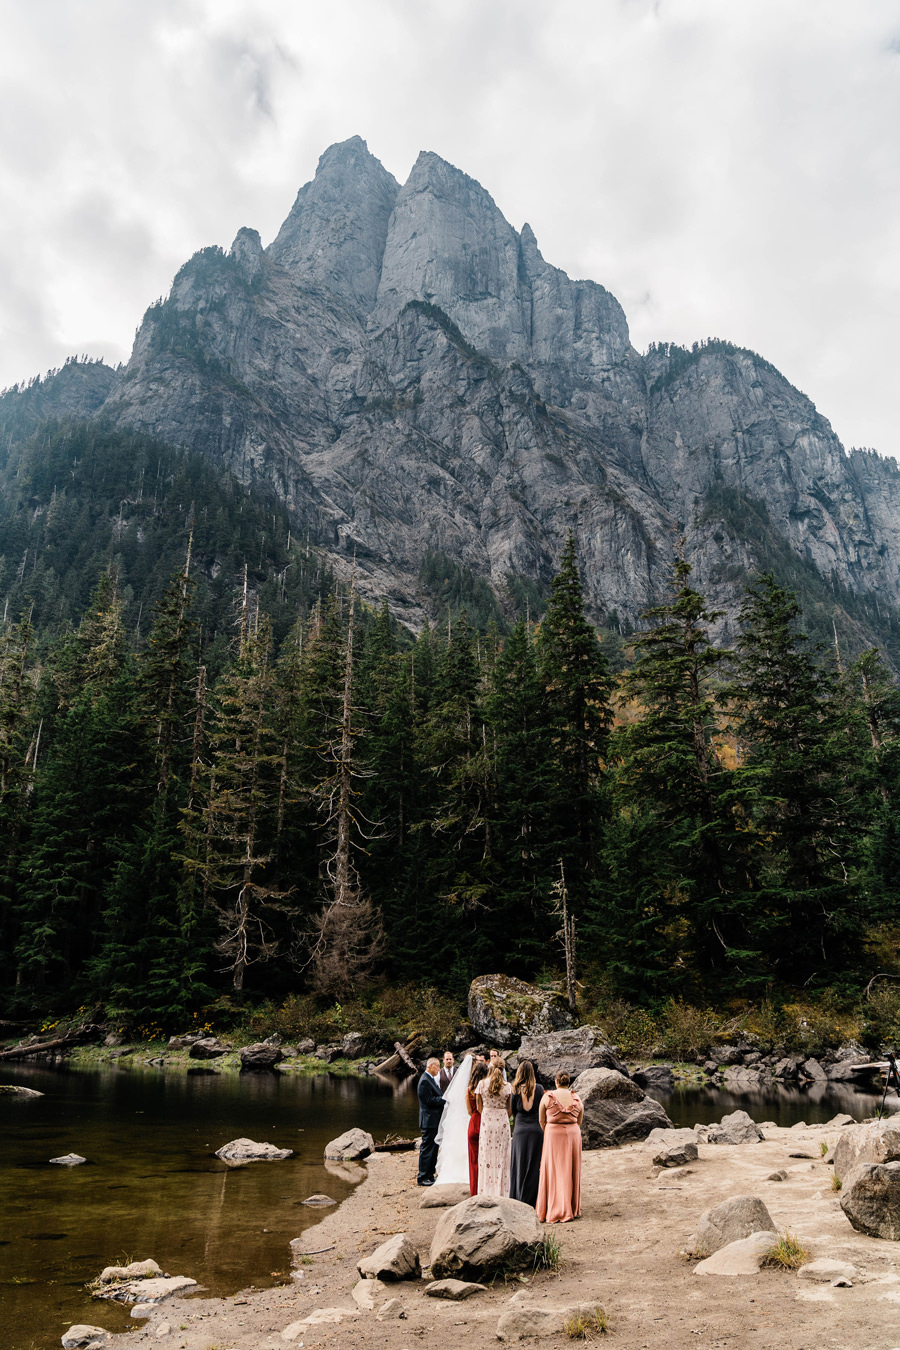 An elopement ceremony takes place next to a towering peak in the Washington backcountry photographed by PNW elopement photographer Amy Galbraith